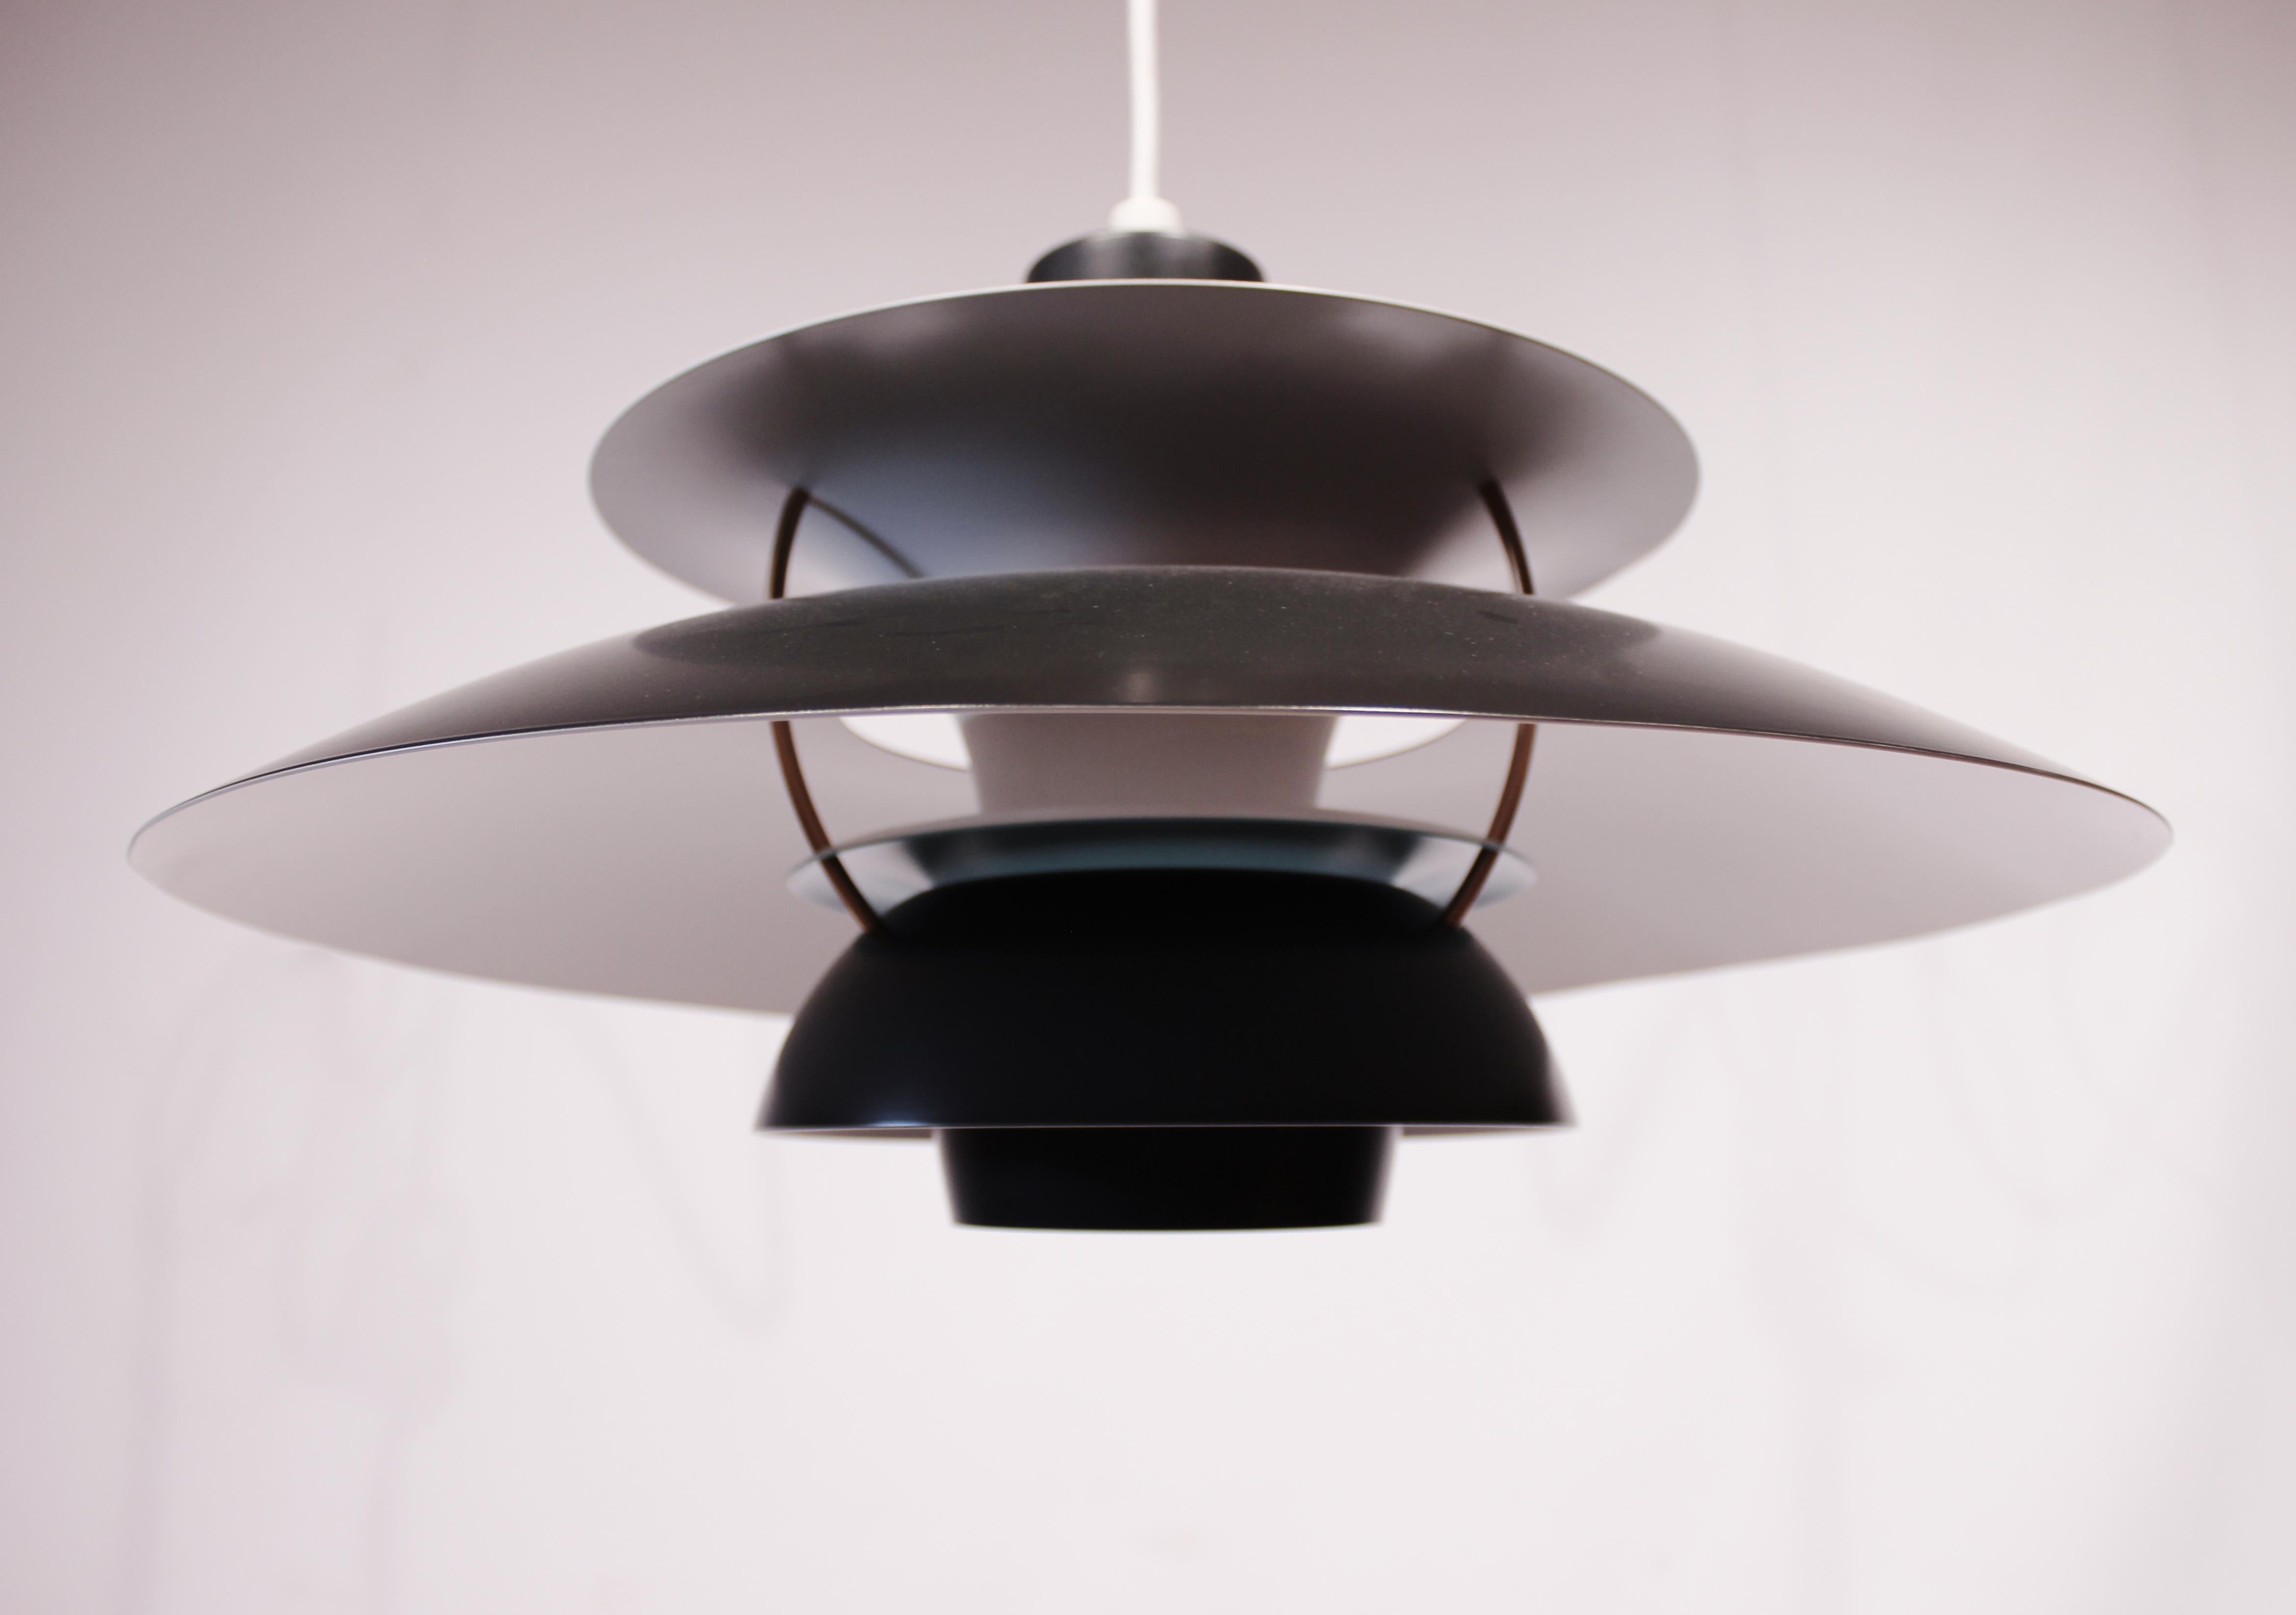 PH5 pendant designed by Poul Henningsen in 1958 and manufactured by Louis Poulsen. The pendant has dark grey lacquered metal Shades. And is of great vintage condition.